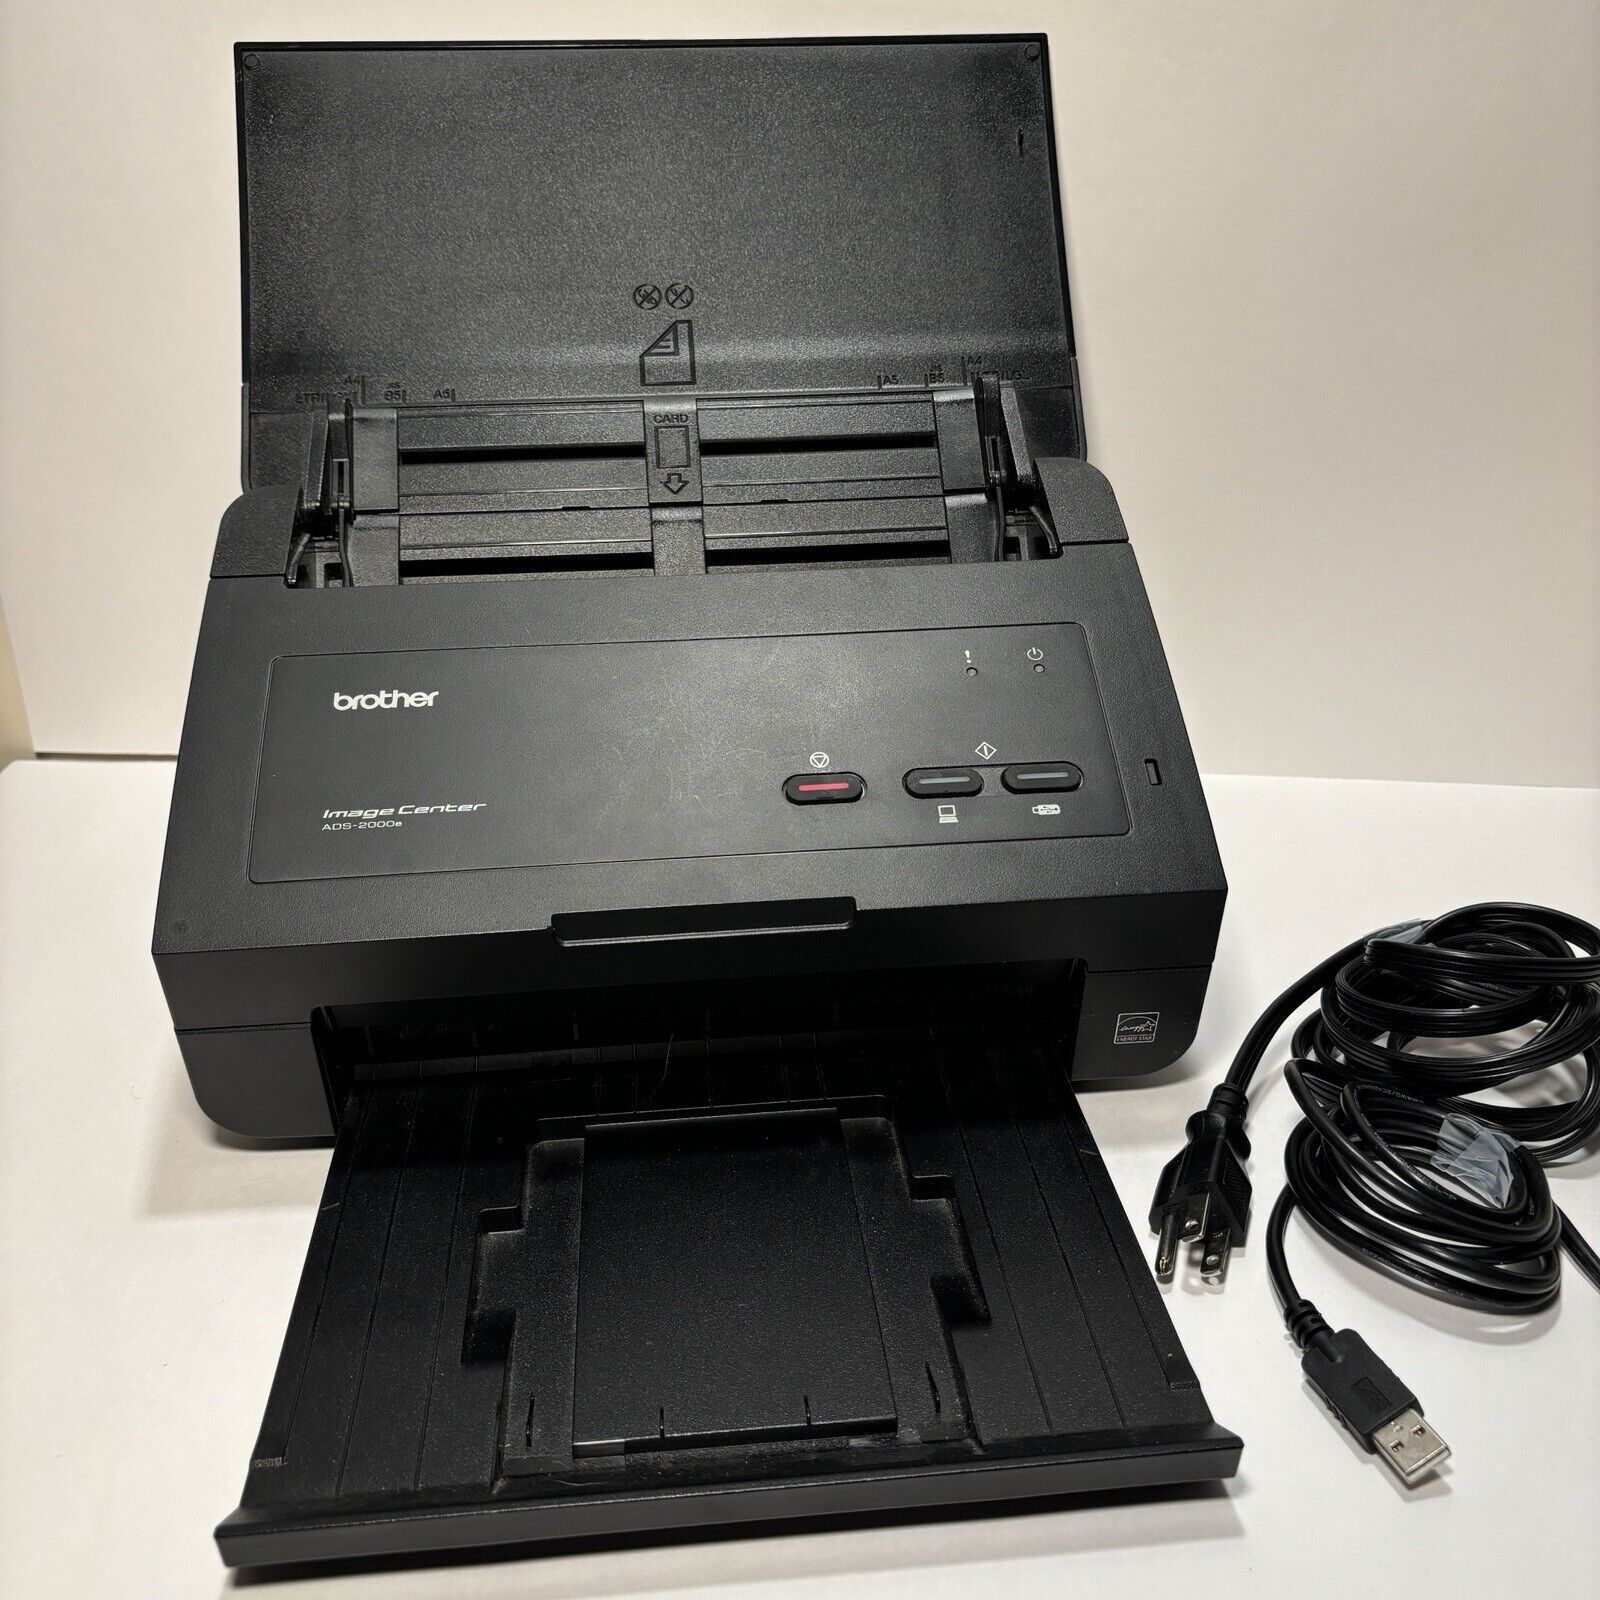 Brother ImageCenter ADS-2000e Color Document Scanner W/ Cables 